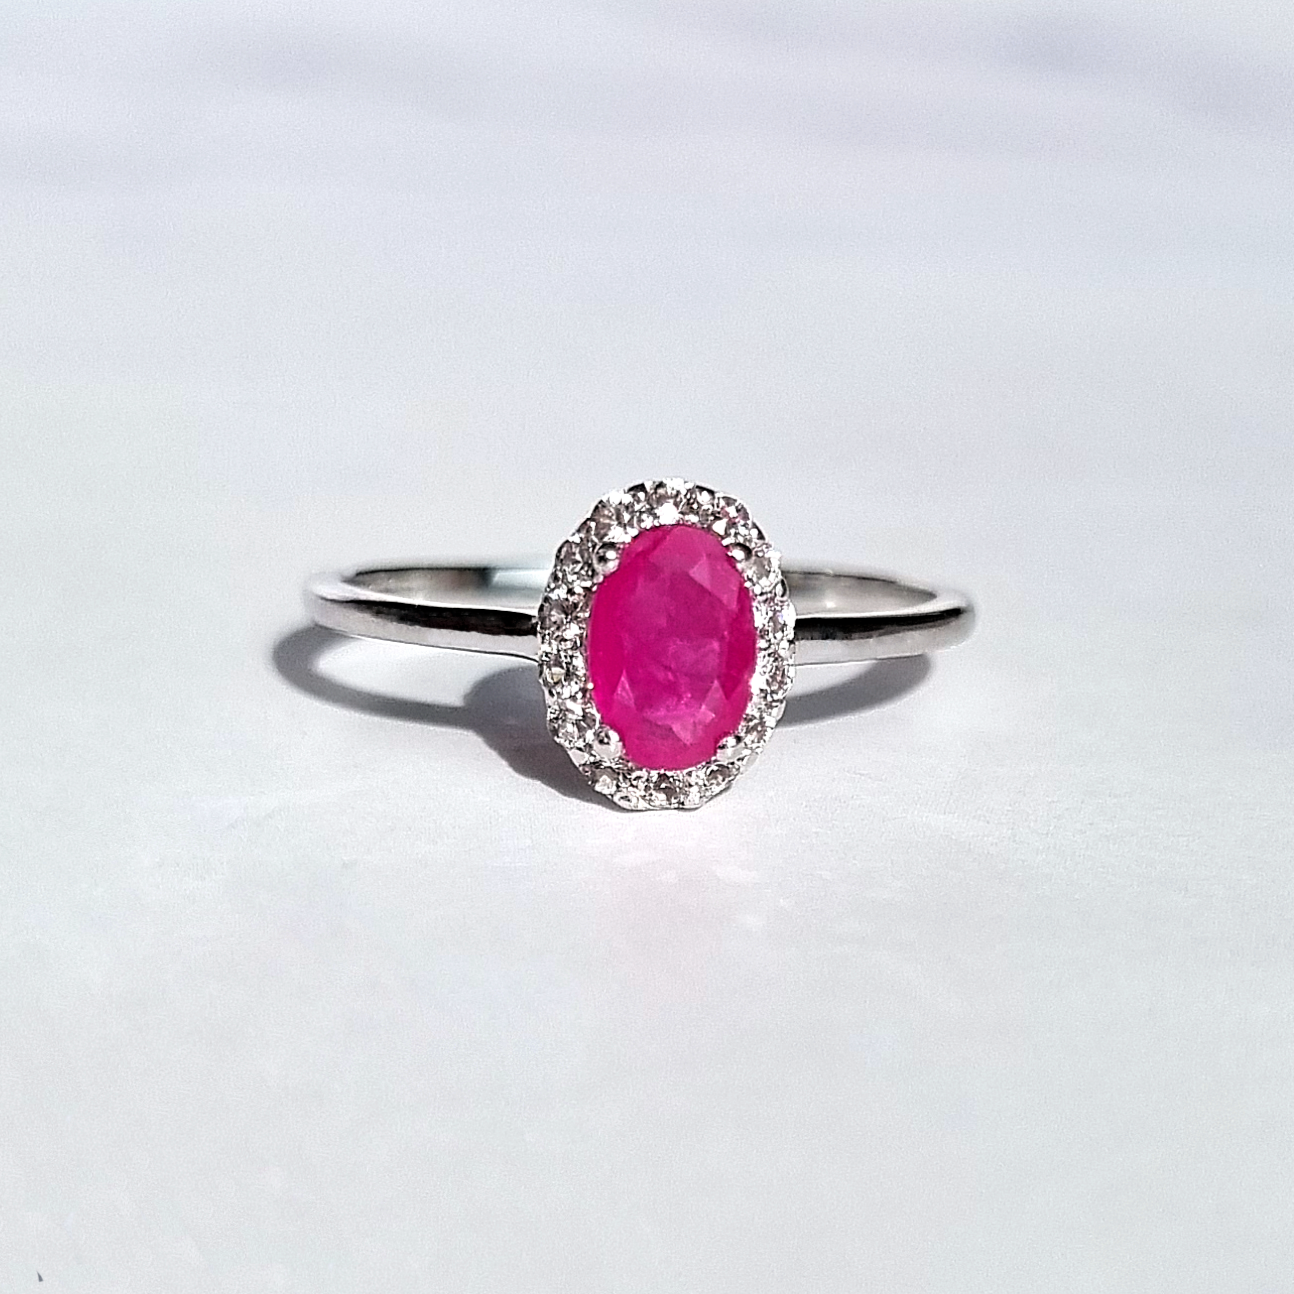  oval cut pinkish red gemstone and white topaz engagement , promise , wedding ring in sterling sliver